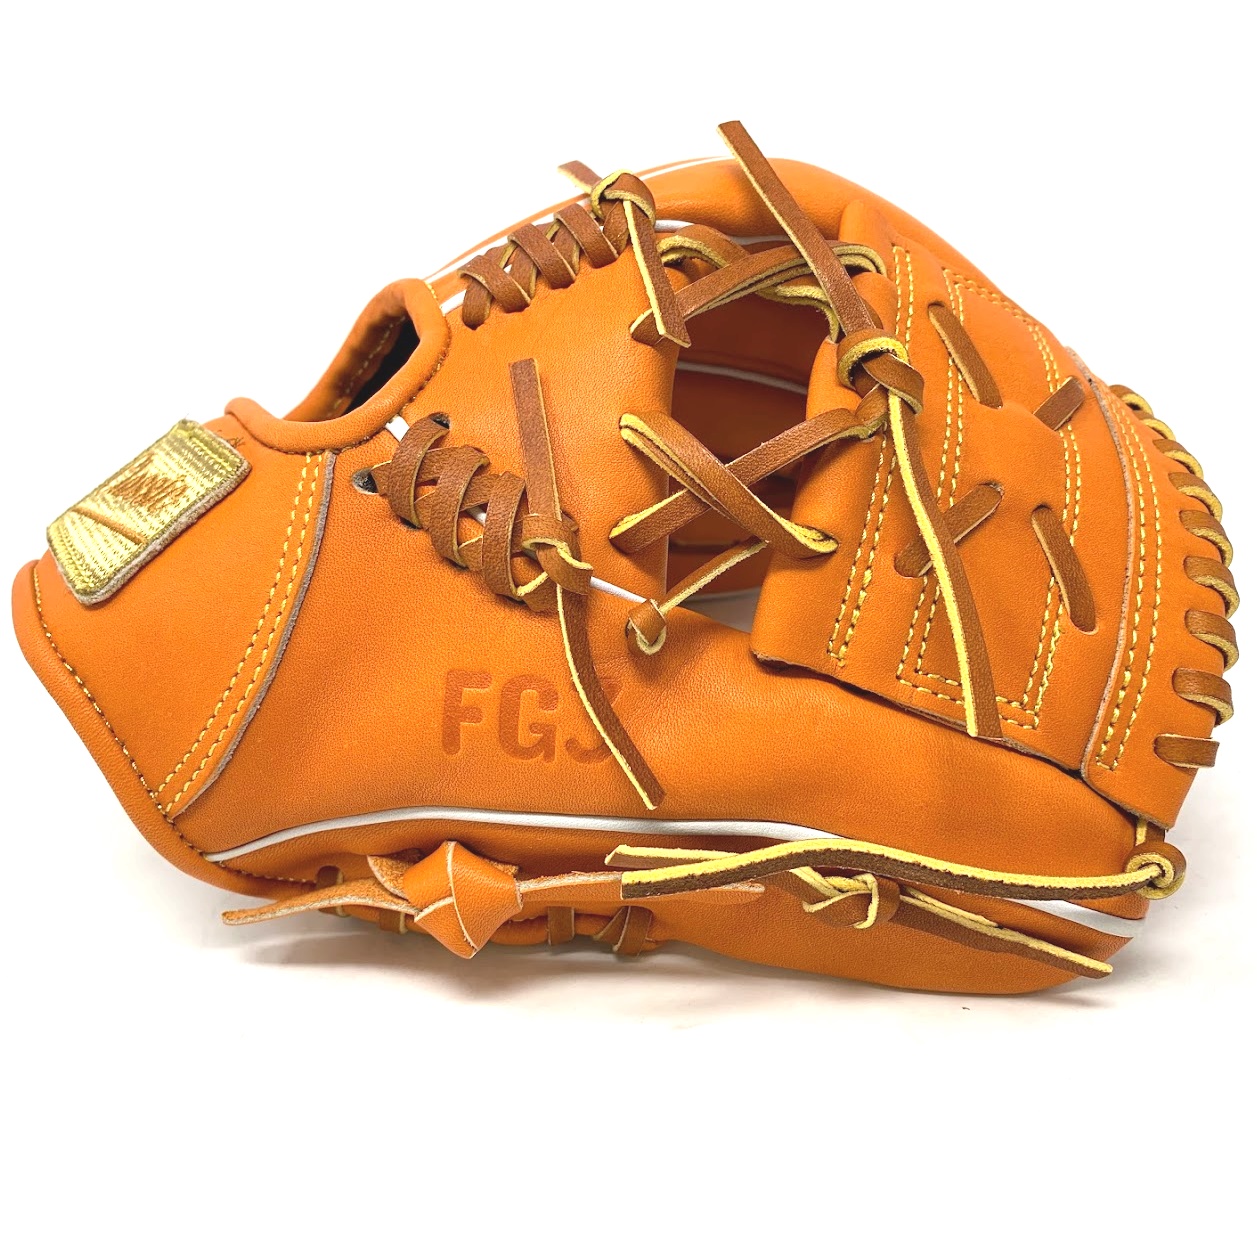 classic-baseball-glove-11-inch-one-piece-web-orange-right-hand-throw FG3-11-ORT-RightHandThrow   <p>This classic small 11 inch baseball glove is made with orange